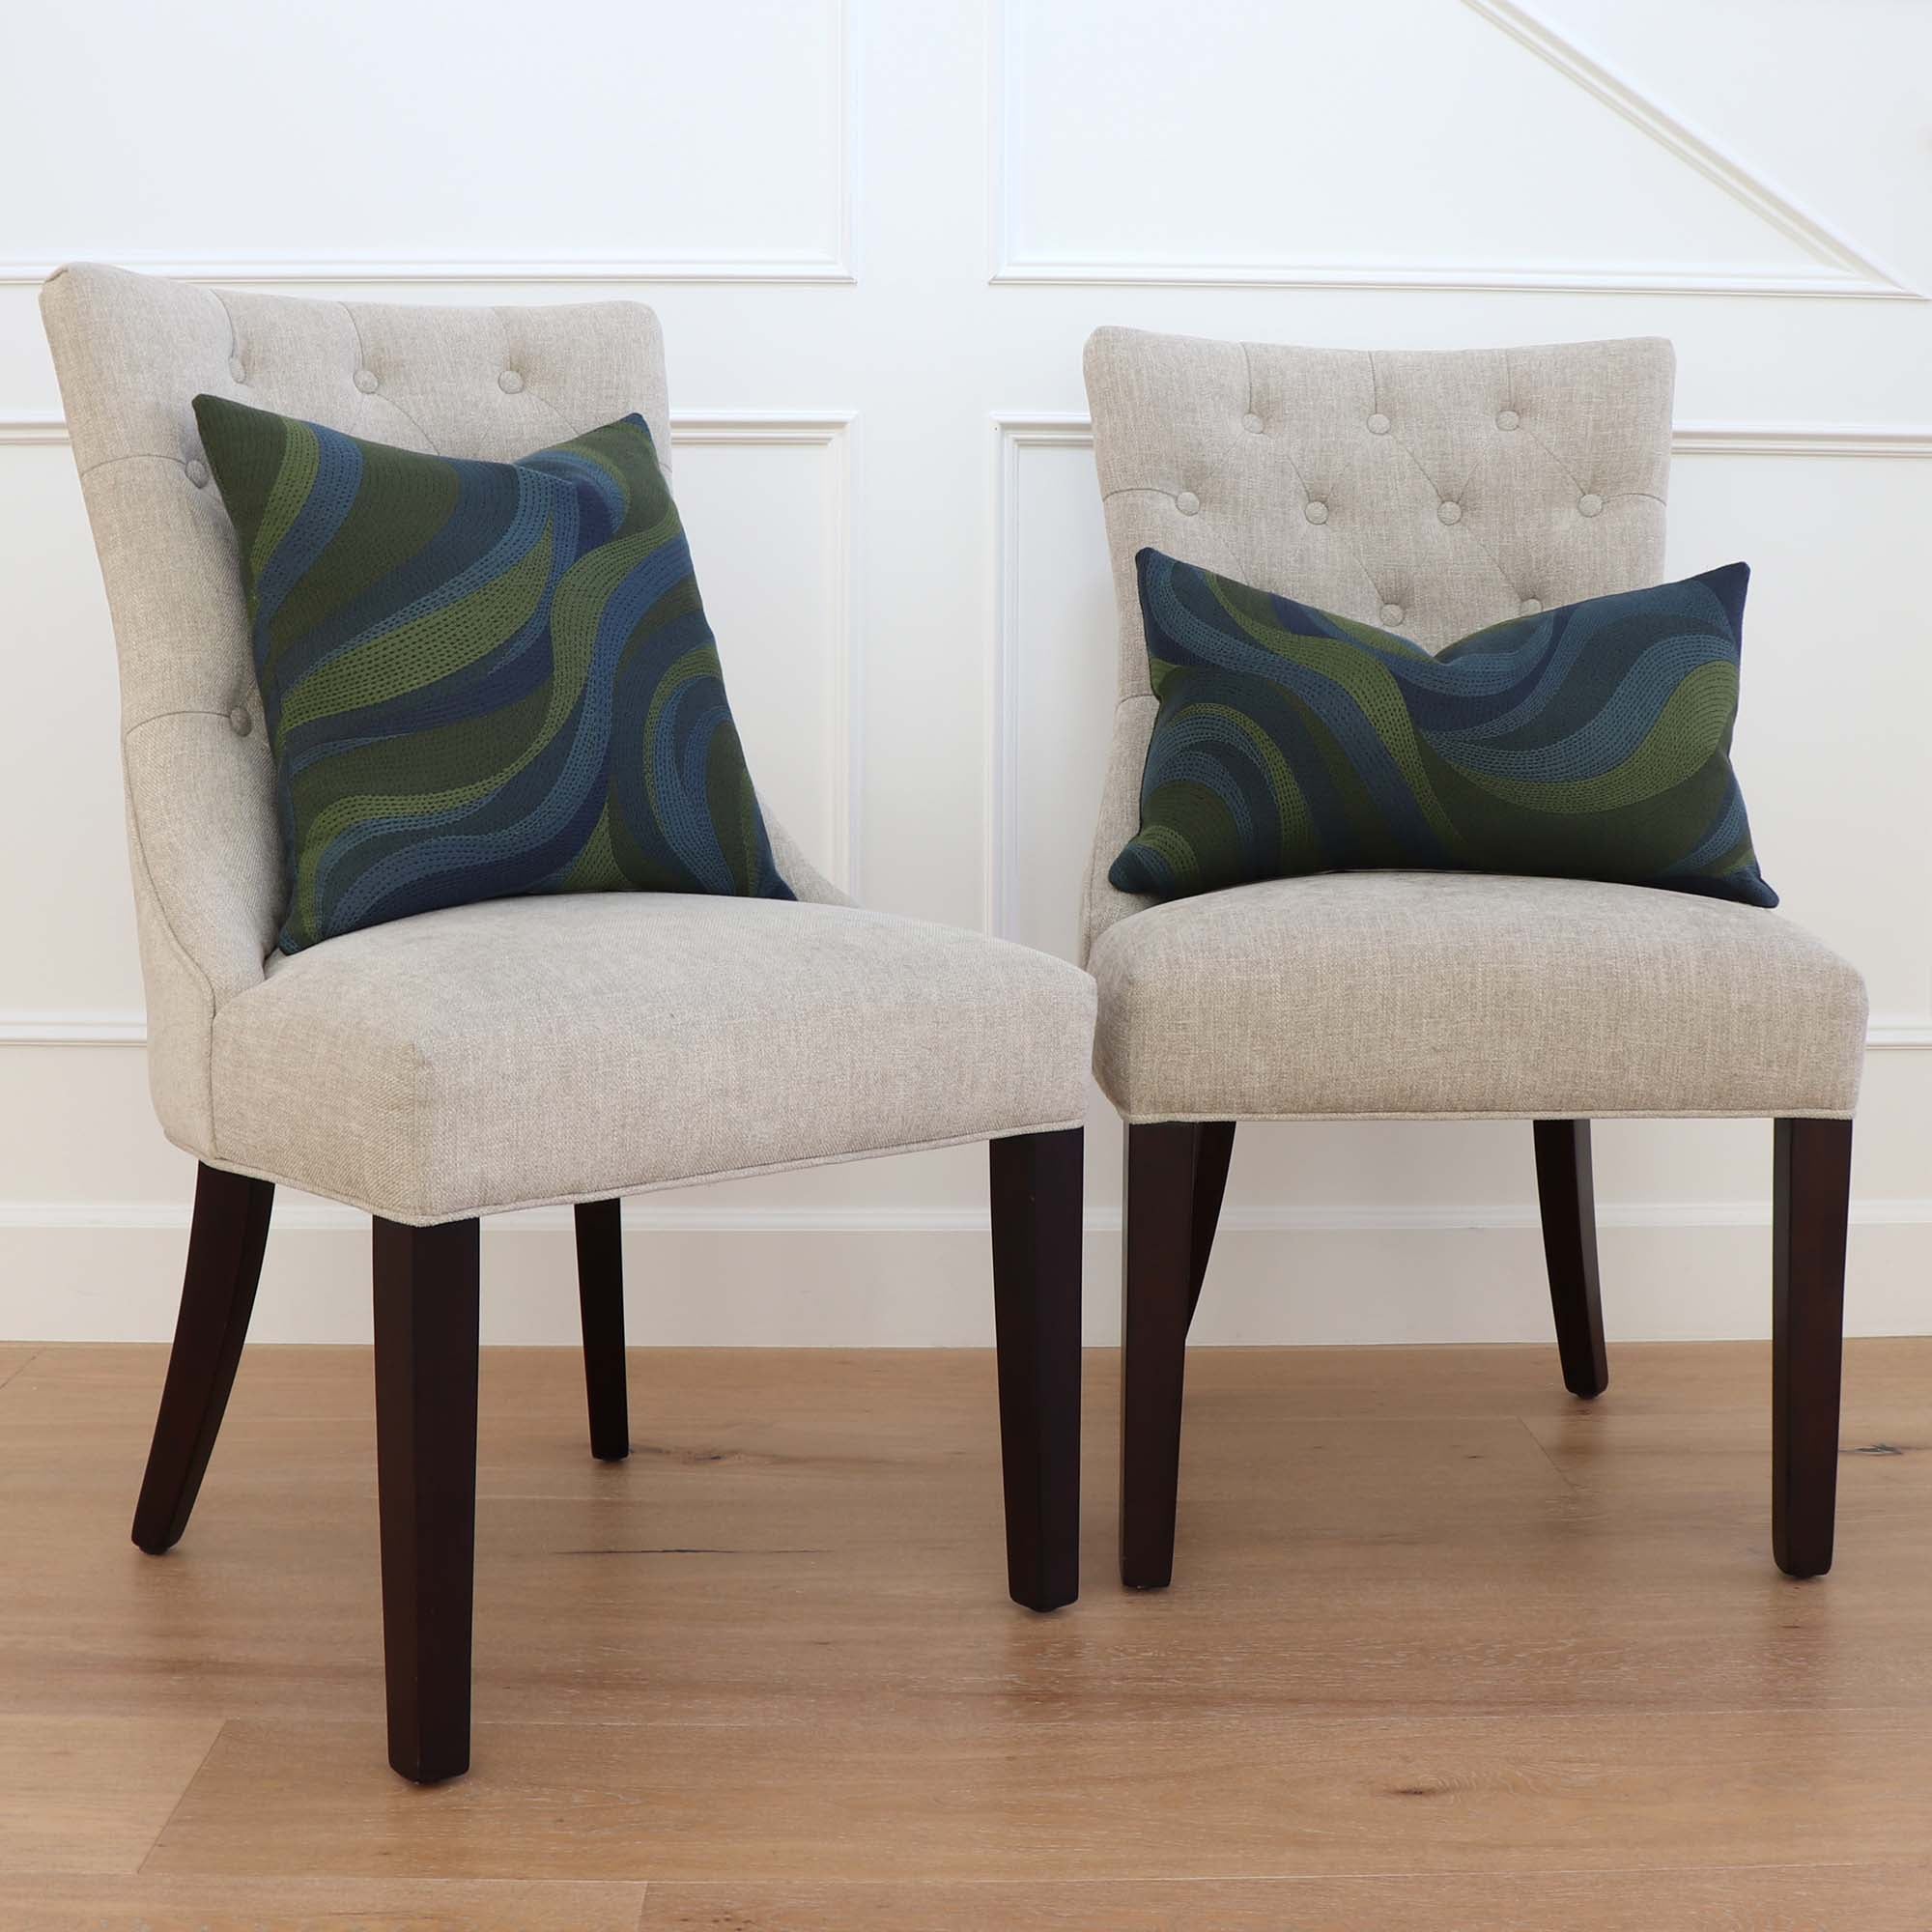 https://www.chloeandolive.com/cdn/shop/files/Thibaut_Passage_Lagoon_Blue_Green_Woven_Performance_Luxury_Designer_Decorative_Throw_Pillow_Cover_on_Chairs_in_Home_5000x.jpg?v=1687793574